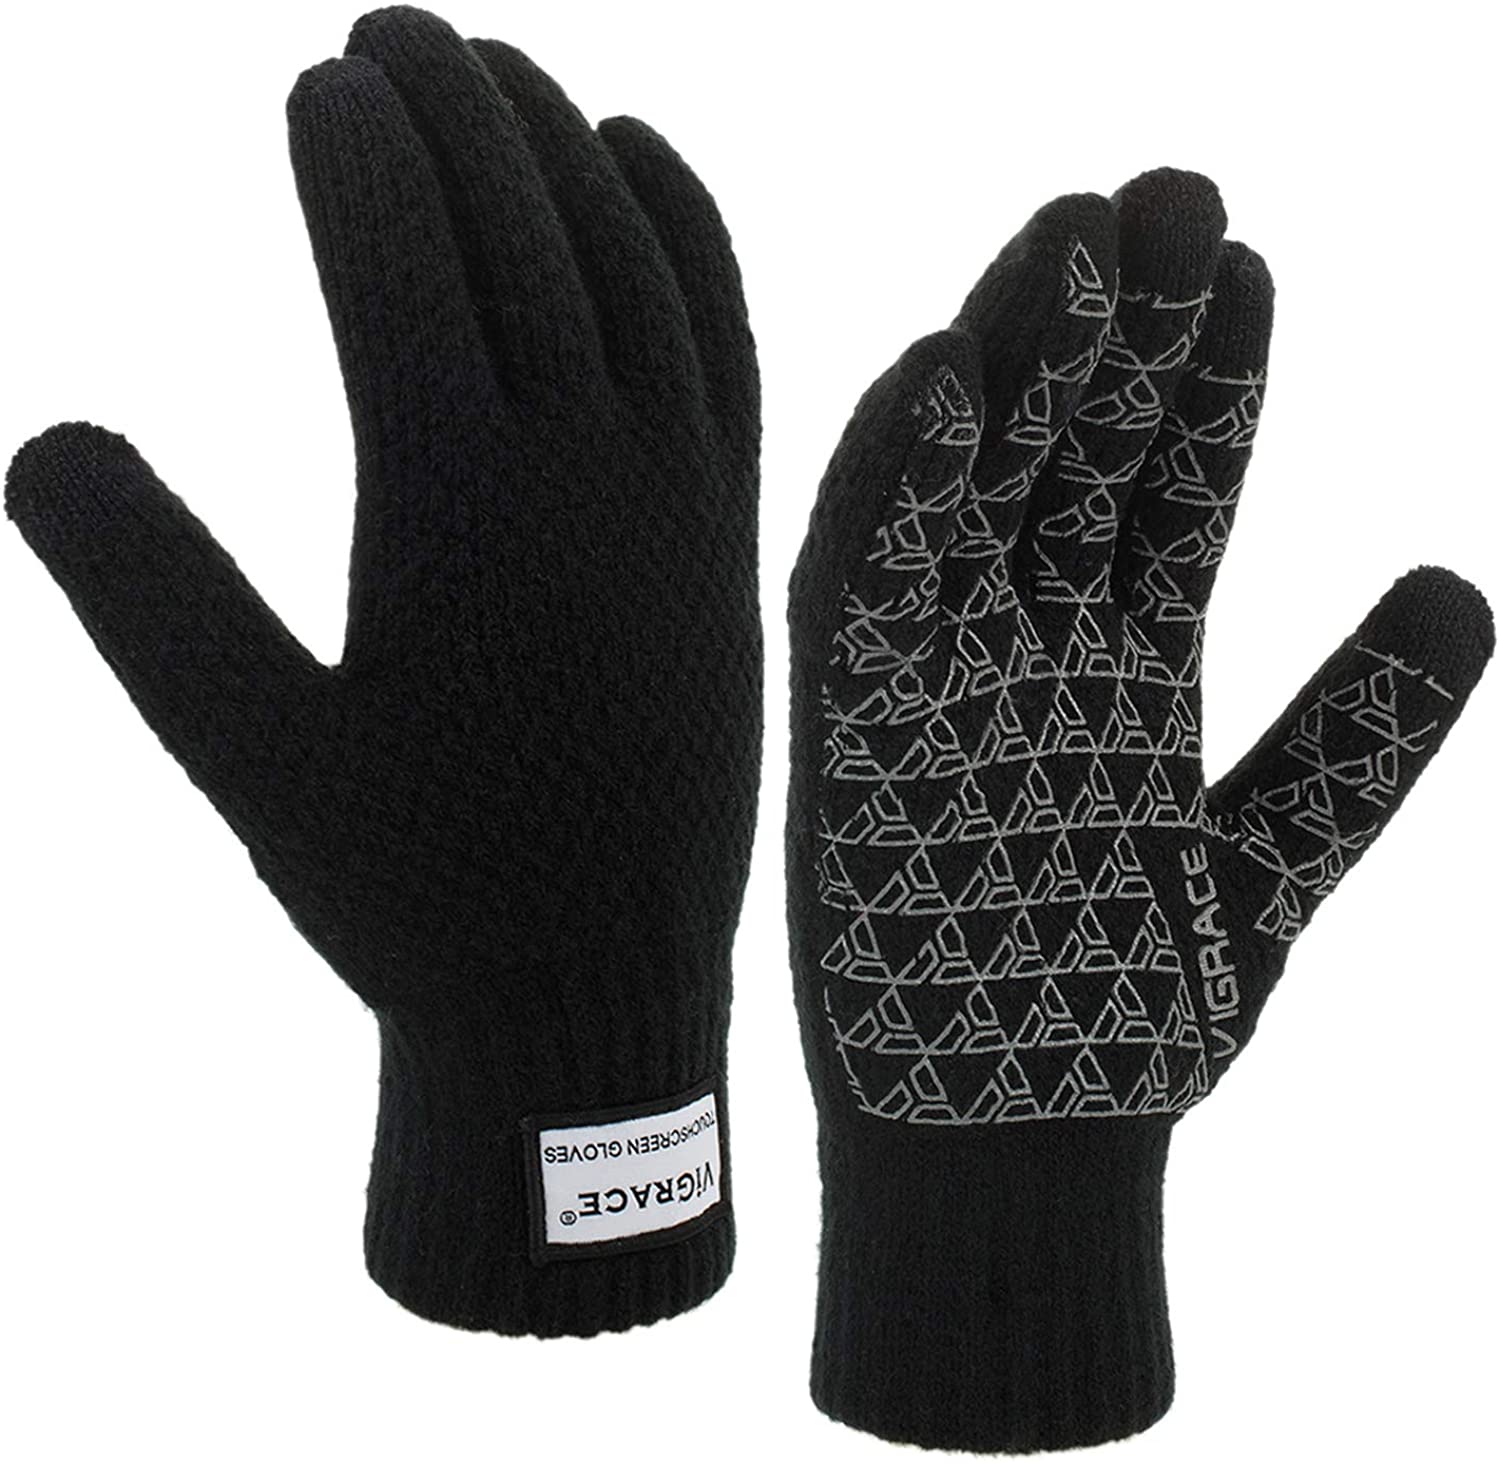 PAGE ONE Mens Warm Winter Non Slip Touchscreen Knit Gloves Warm Fleece Lined,High Sensitive Texting Gloves 